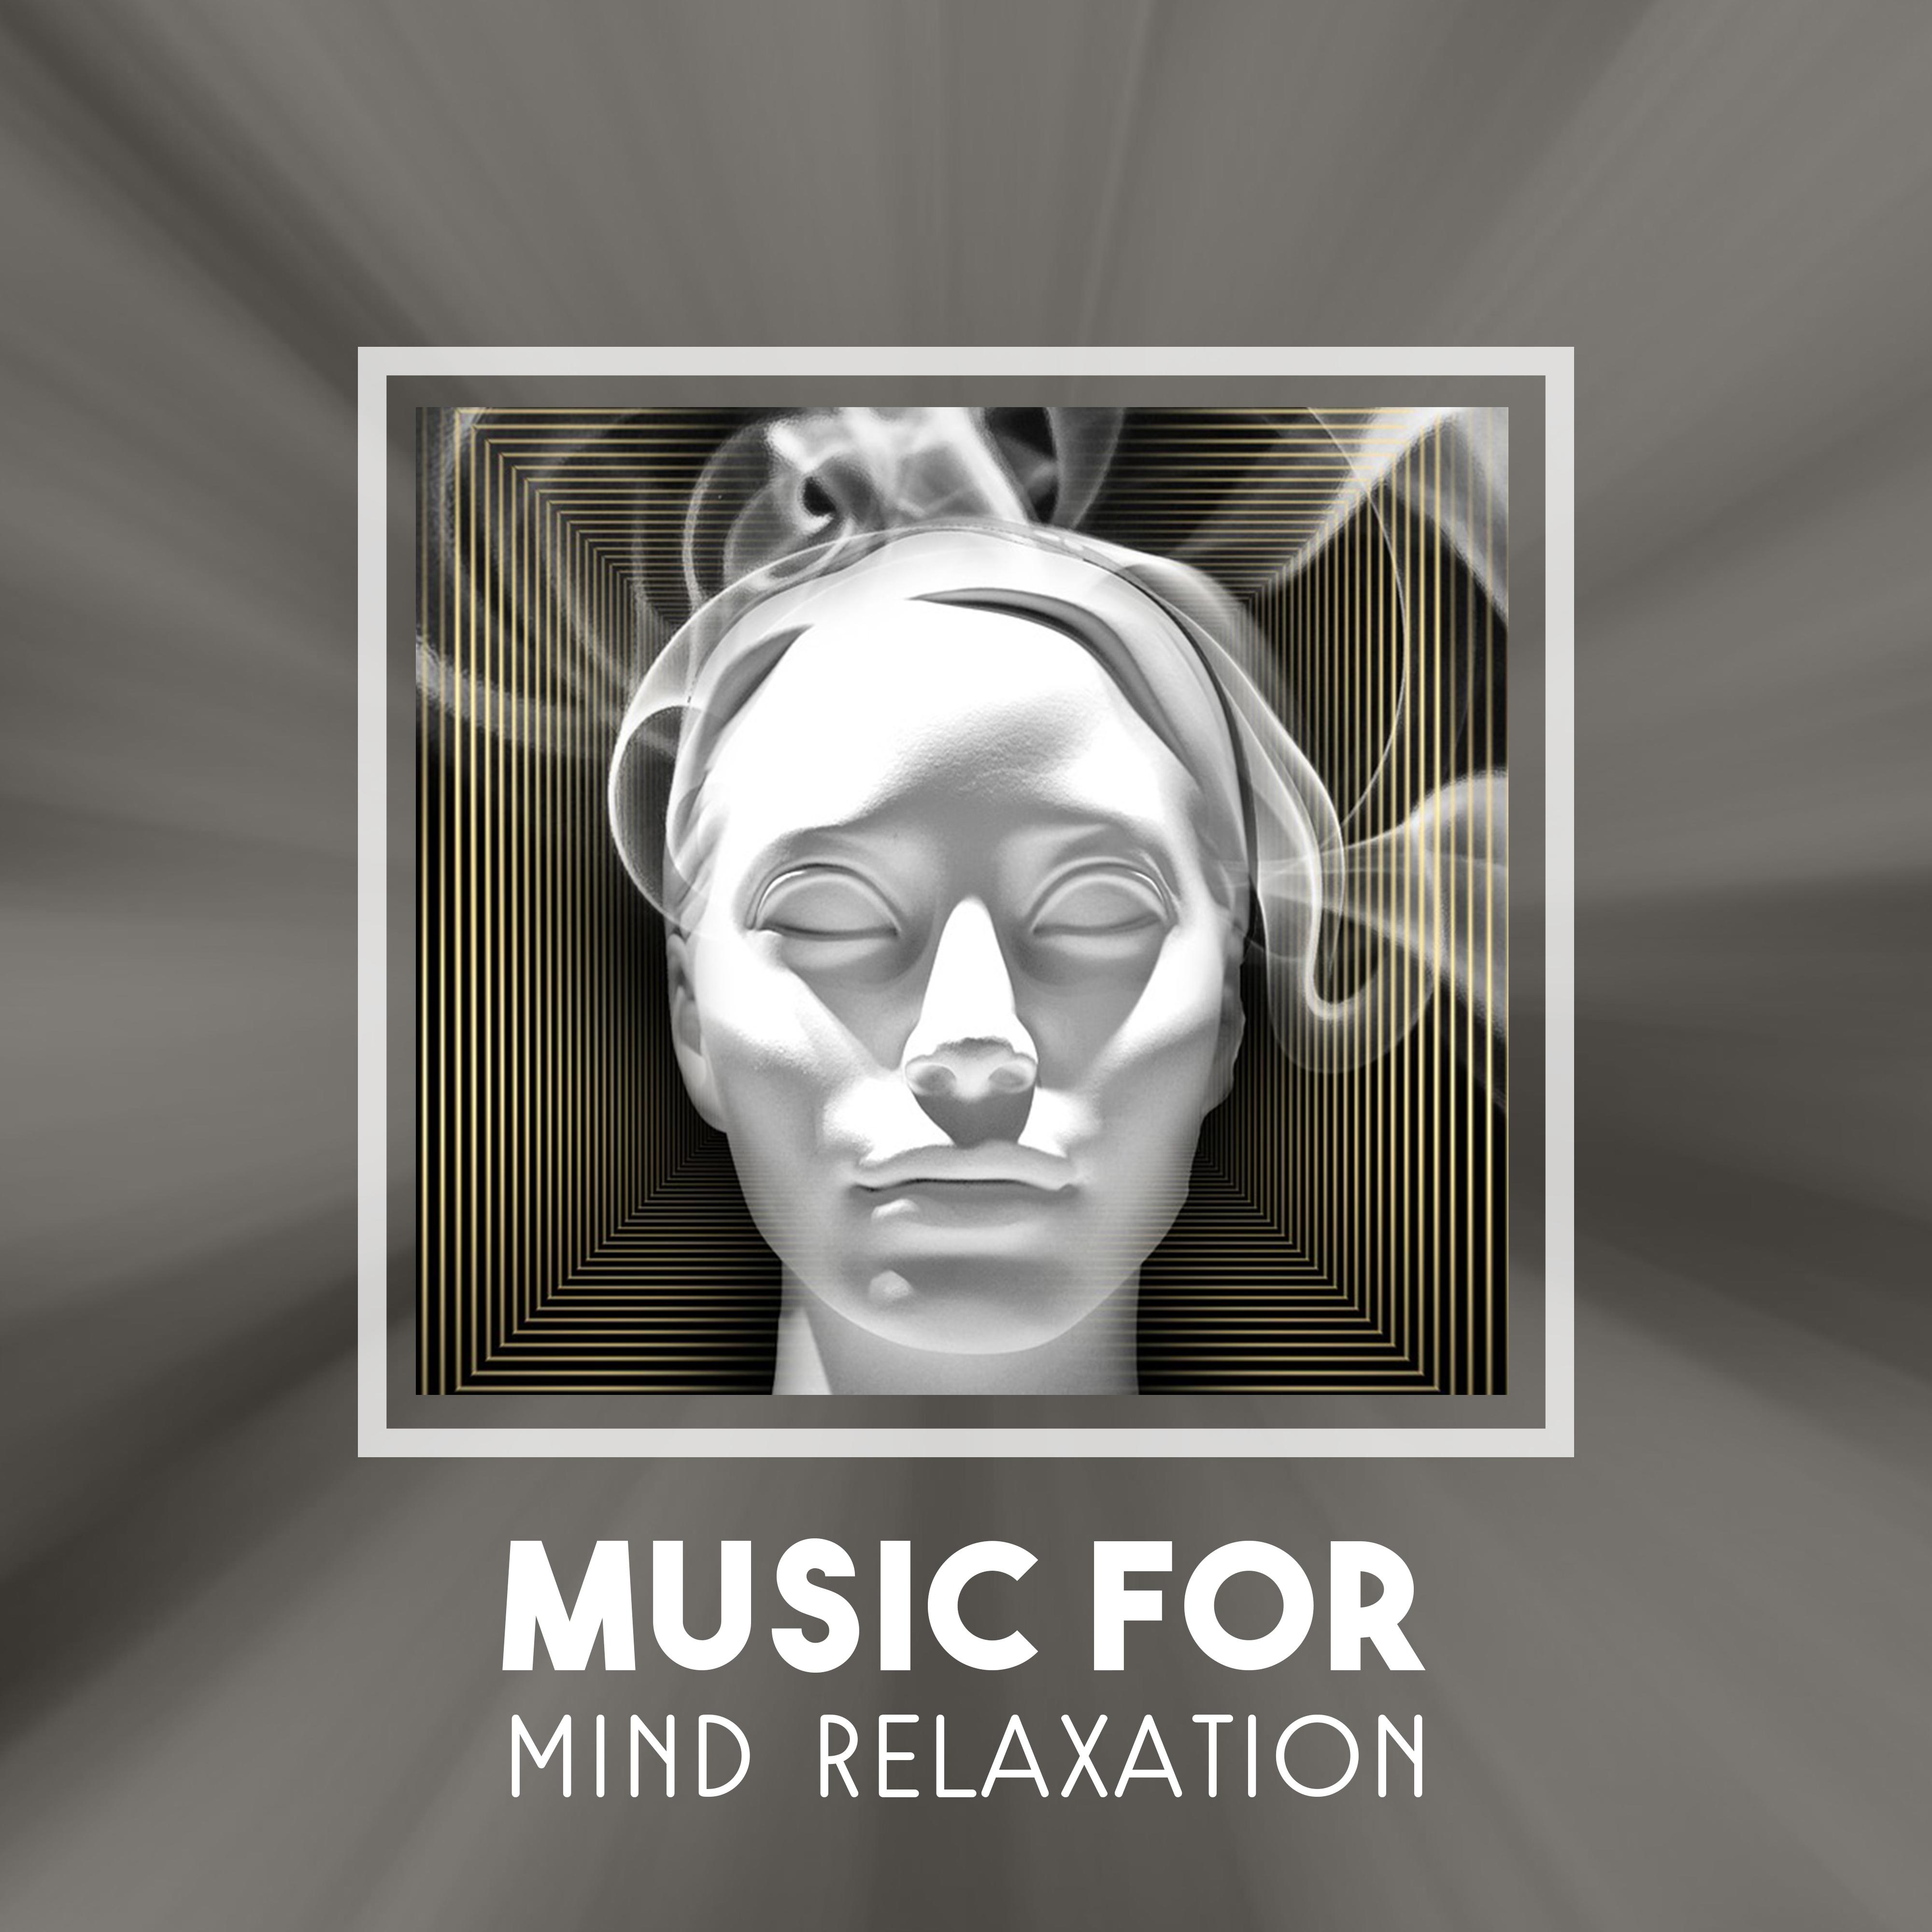 Music for Mind Relaxation